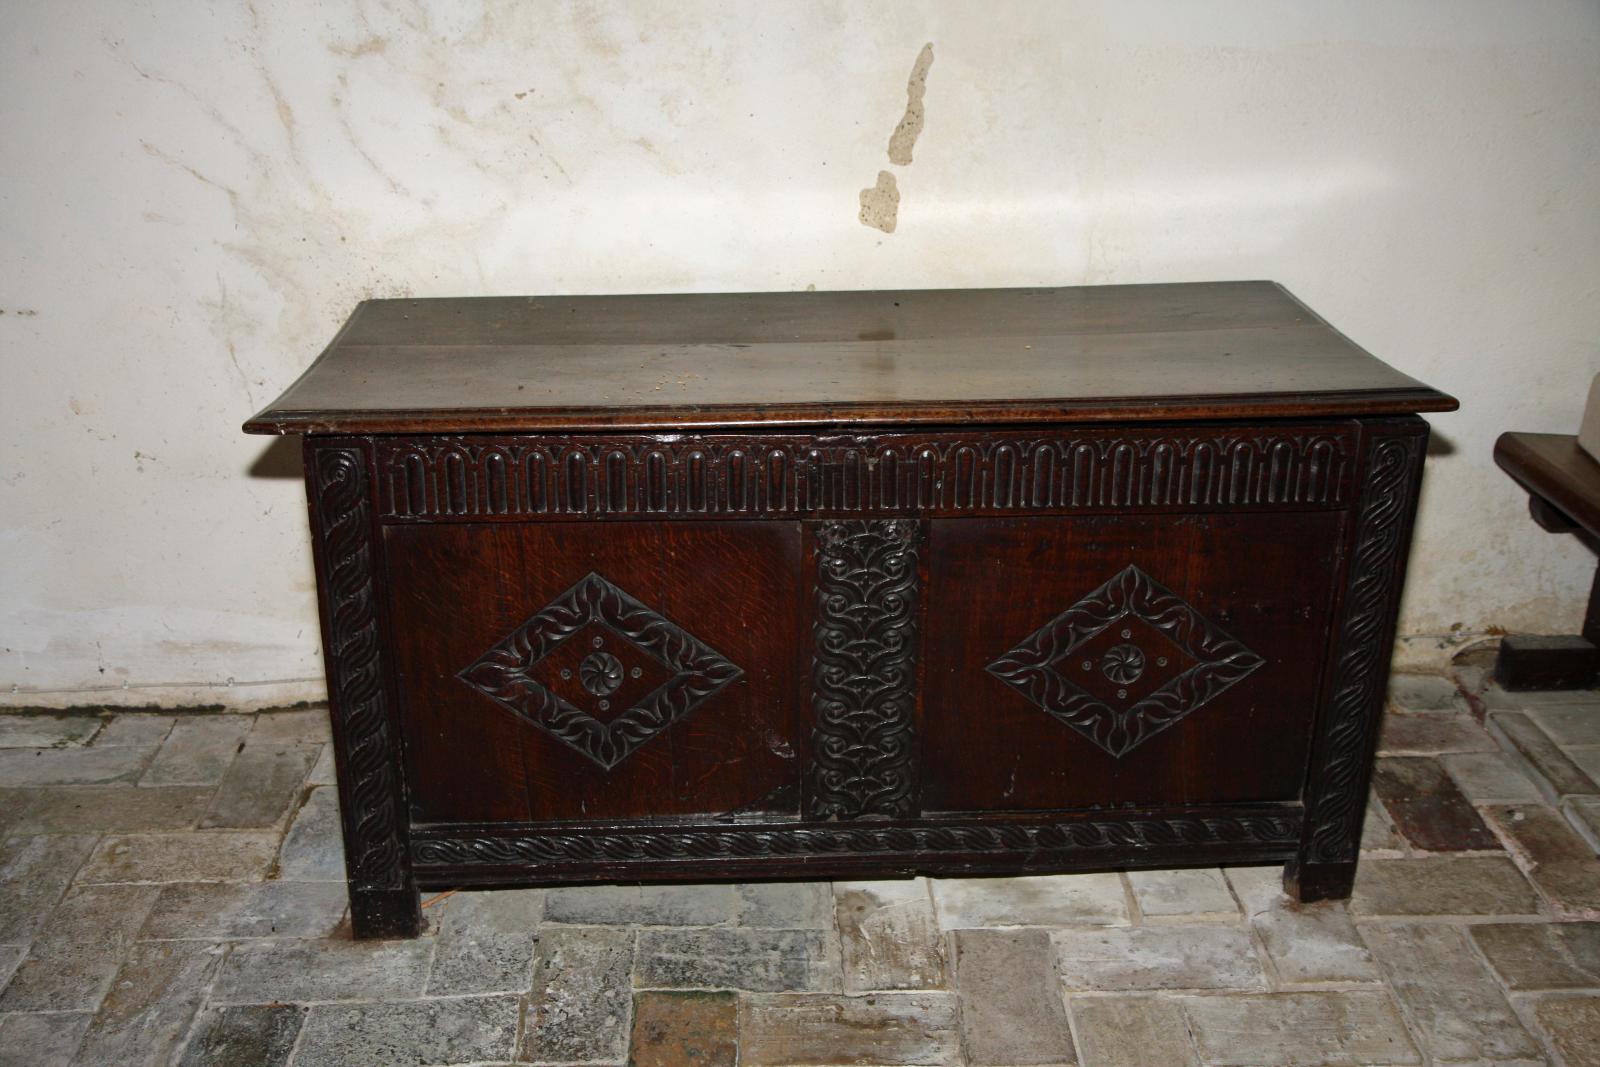 an old wooden desk with ornate designs on top